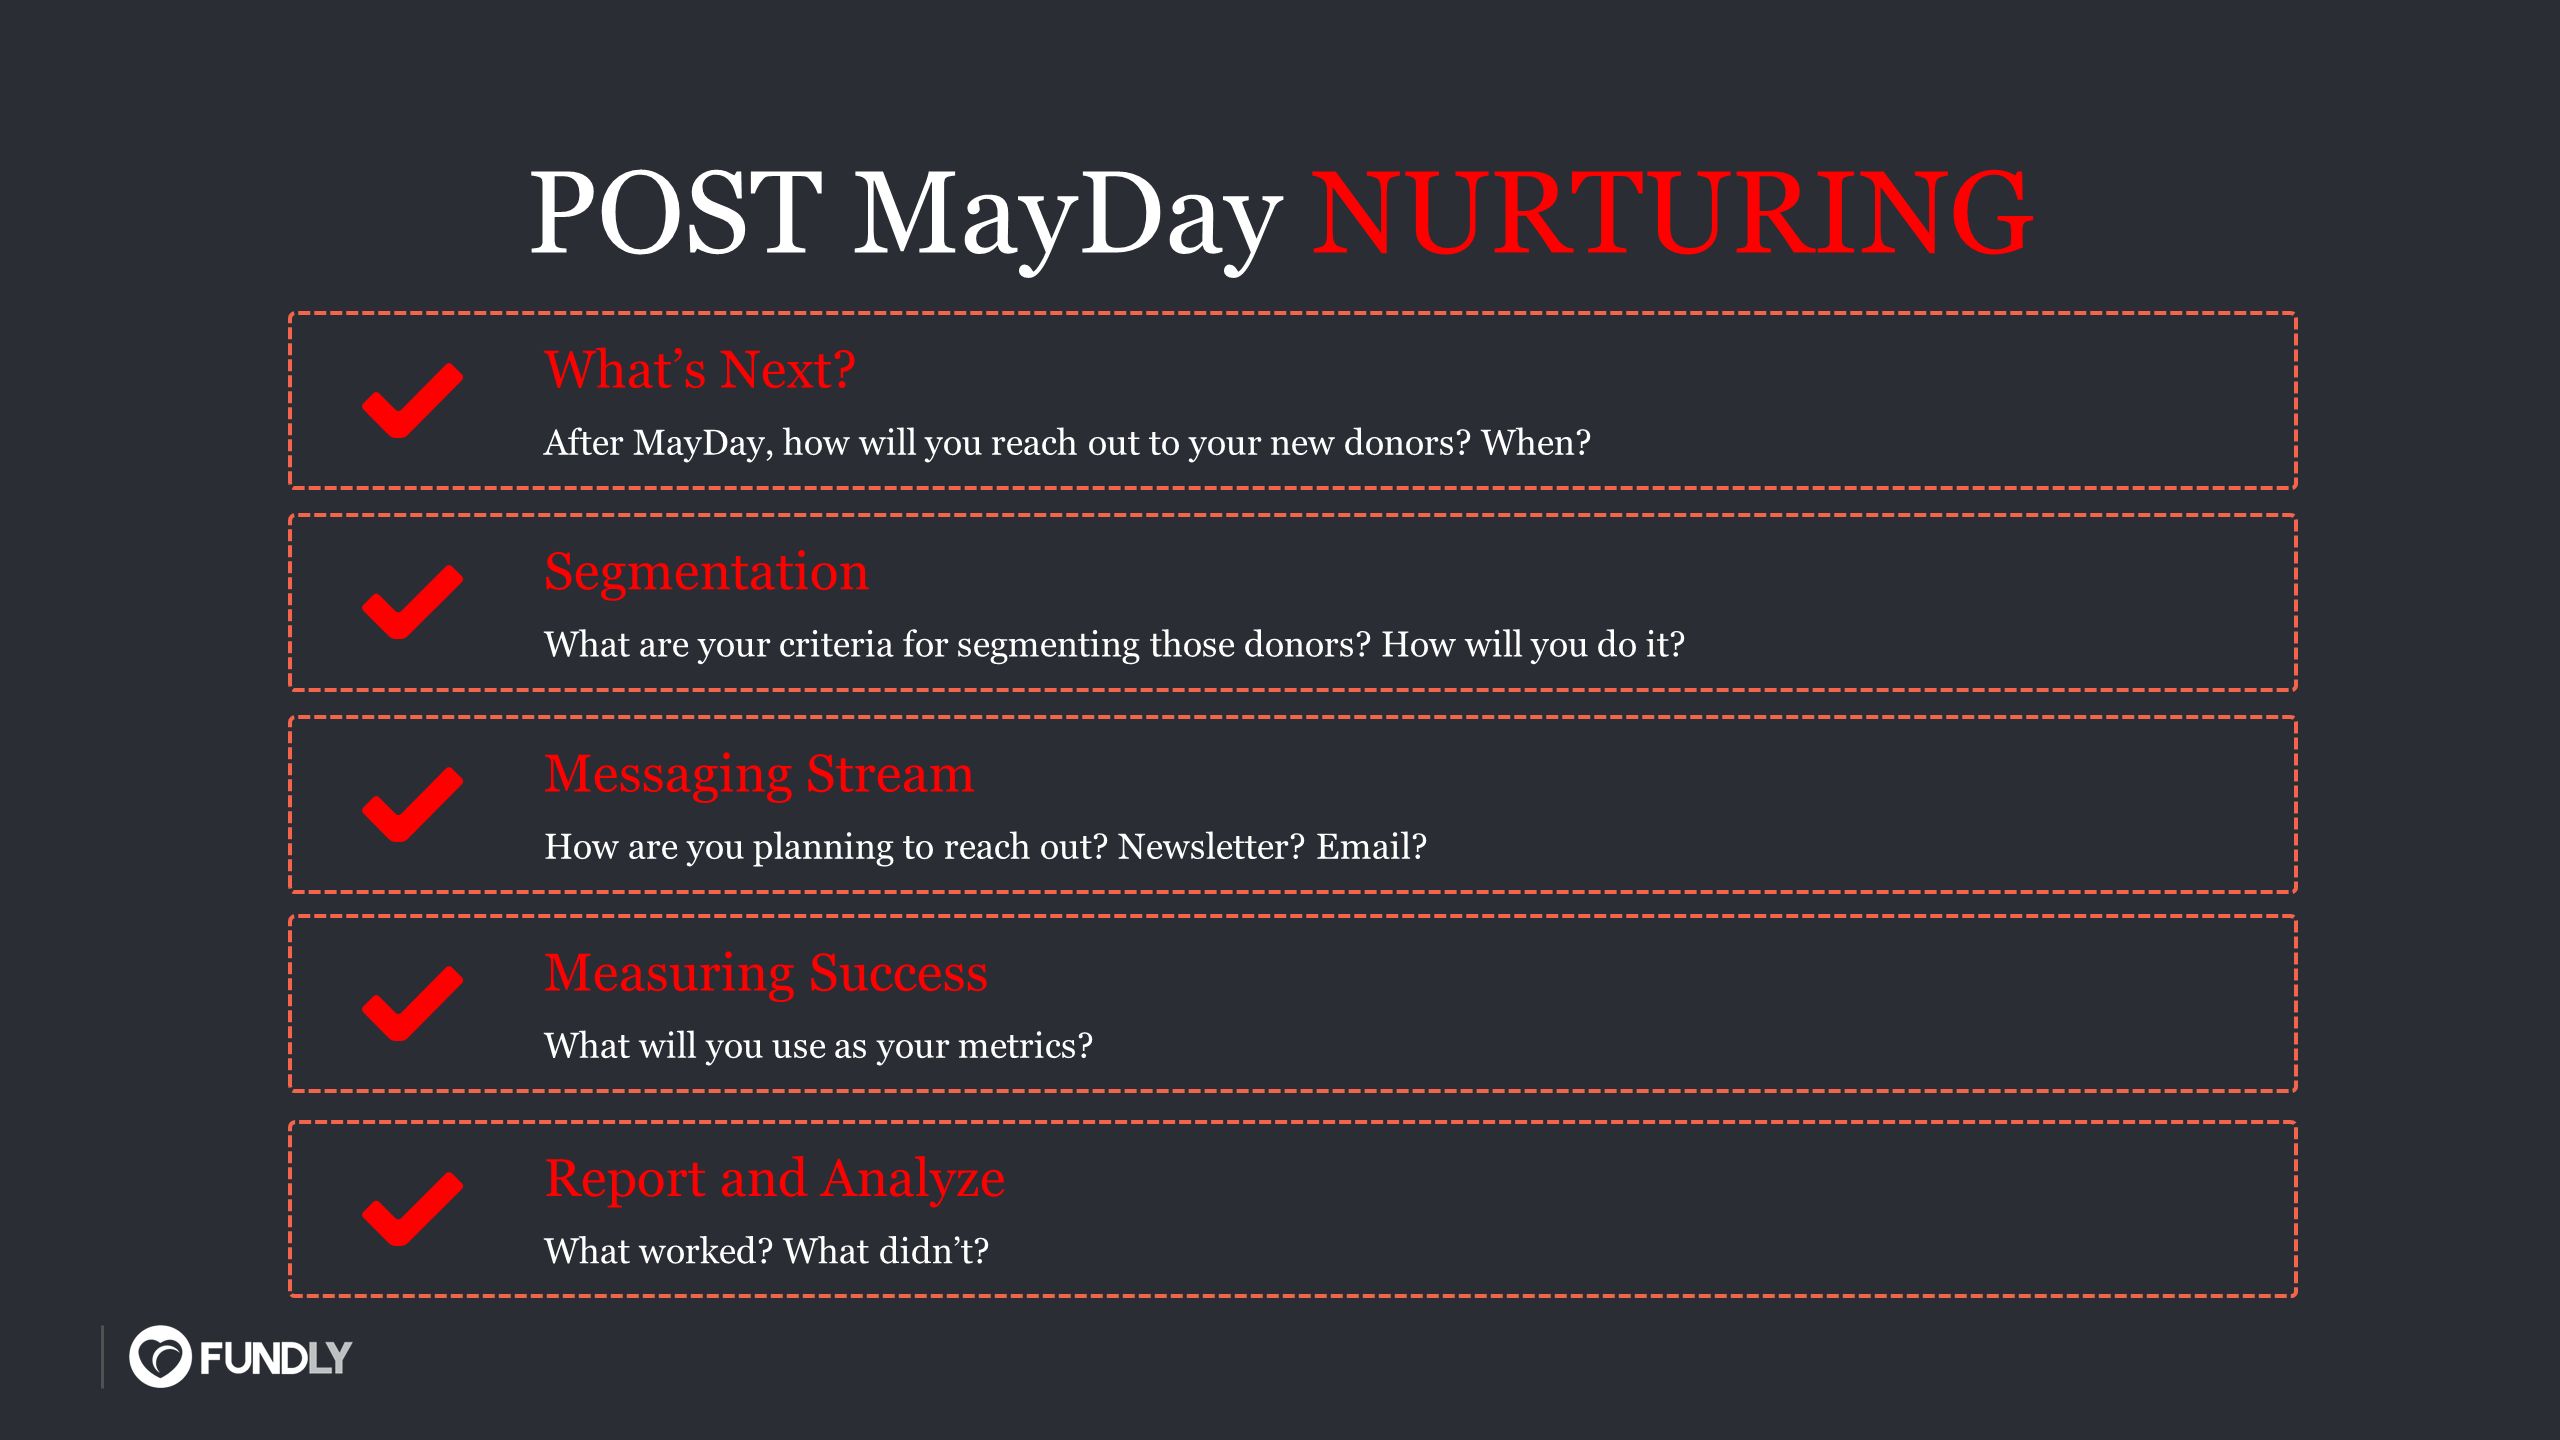 POST MayDay NURTURING After MayDay, how will you reach out to your new donors.